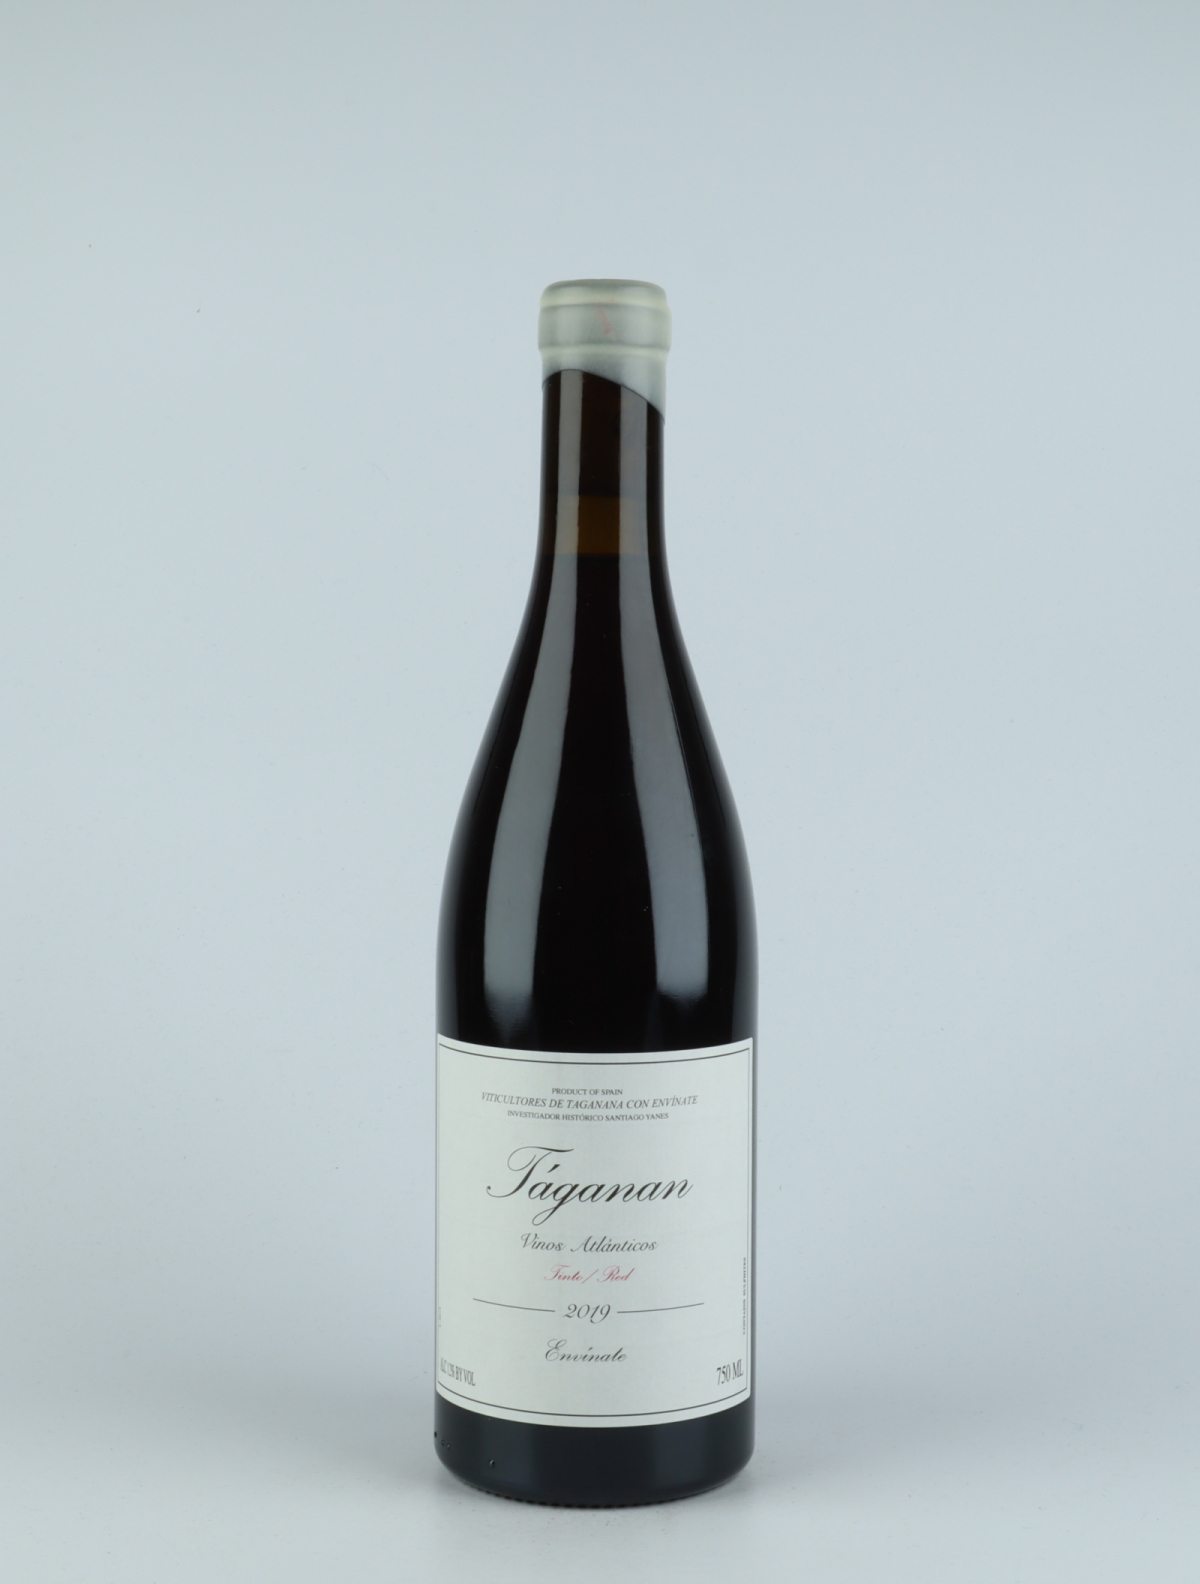 A bottle 2019 Taganan Tinto - Tenerife Red wine from Envínate,  in Spain